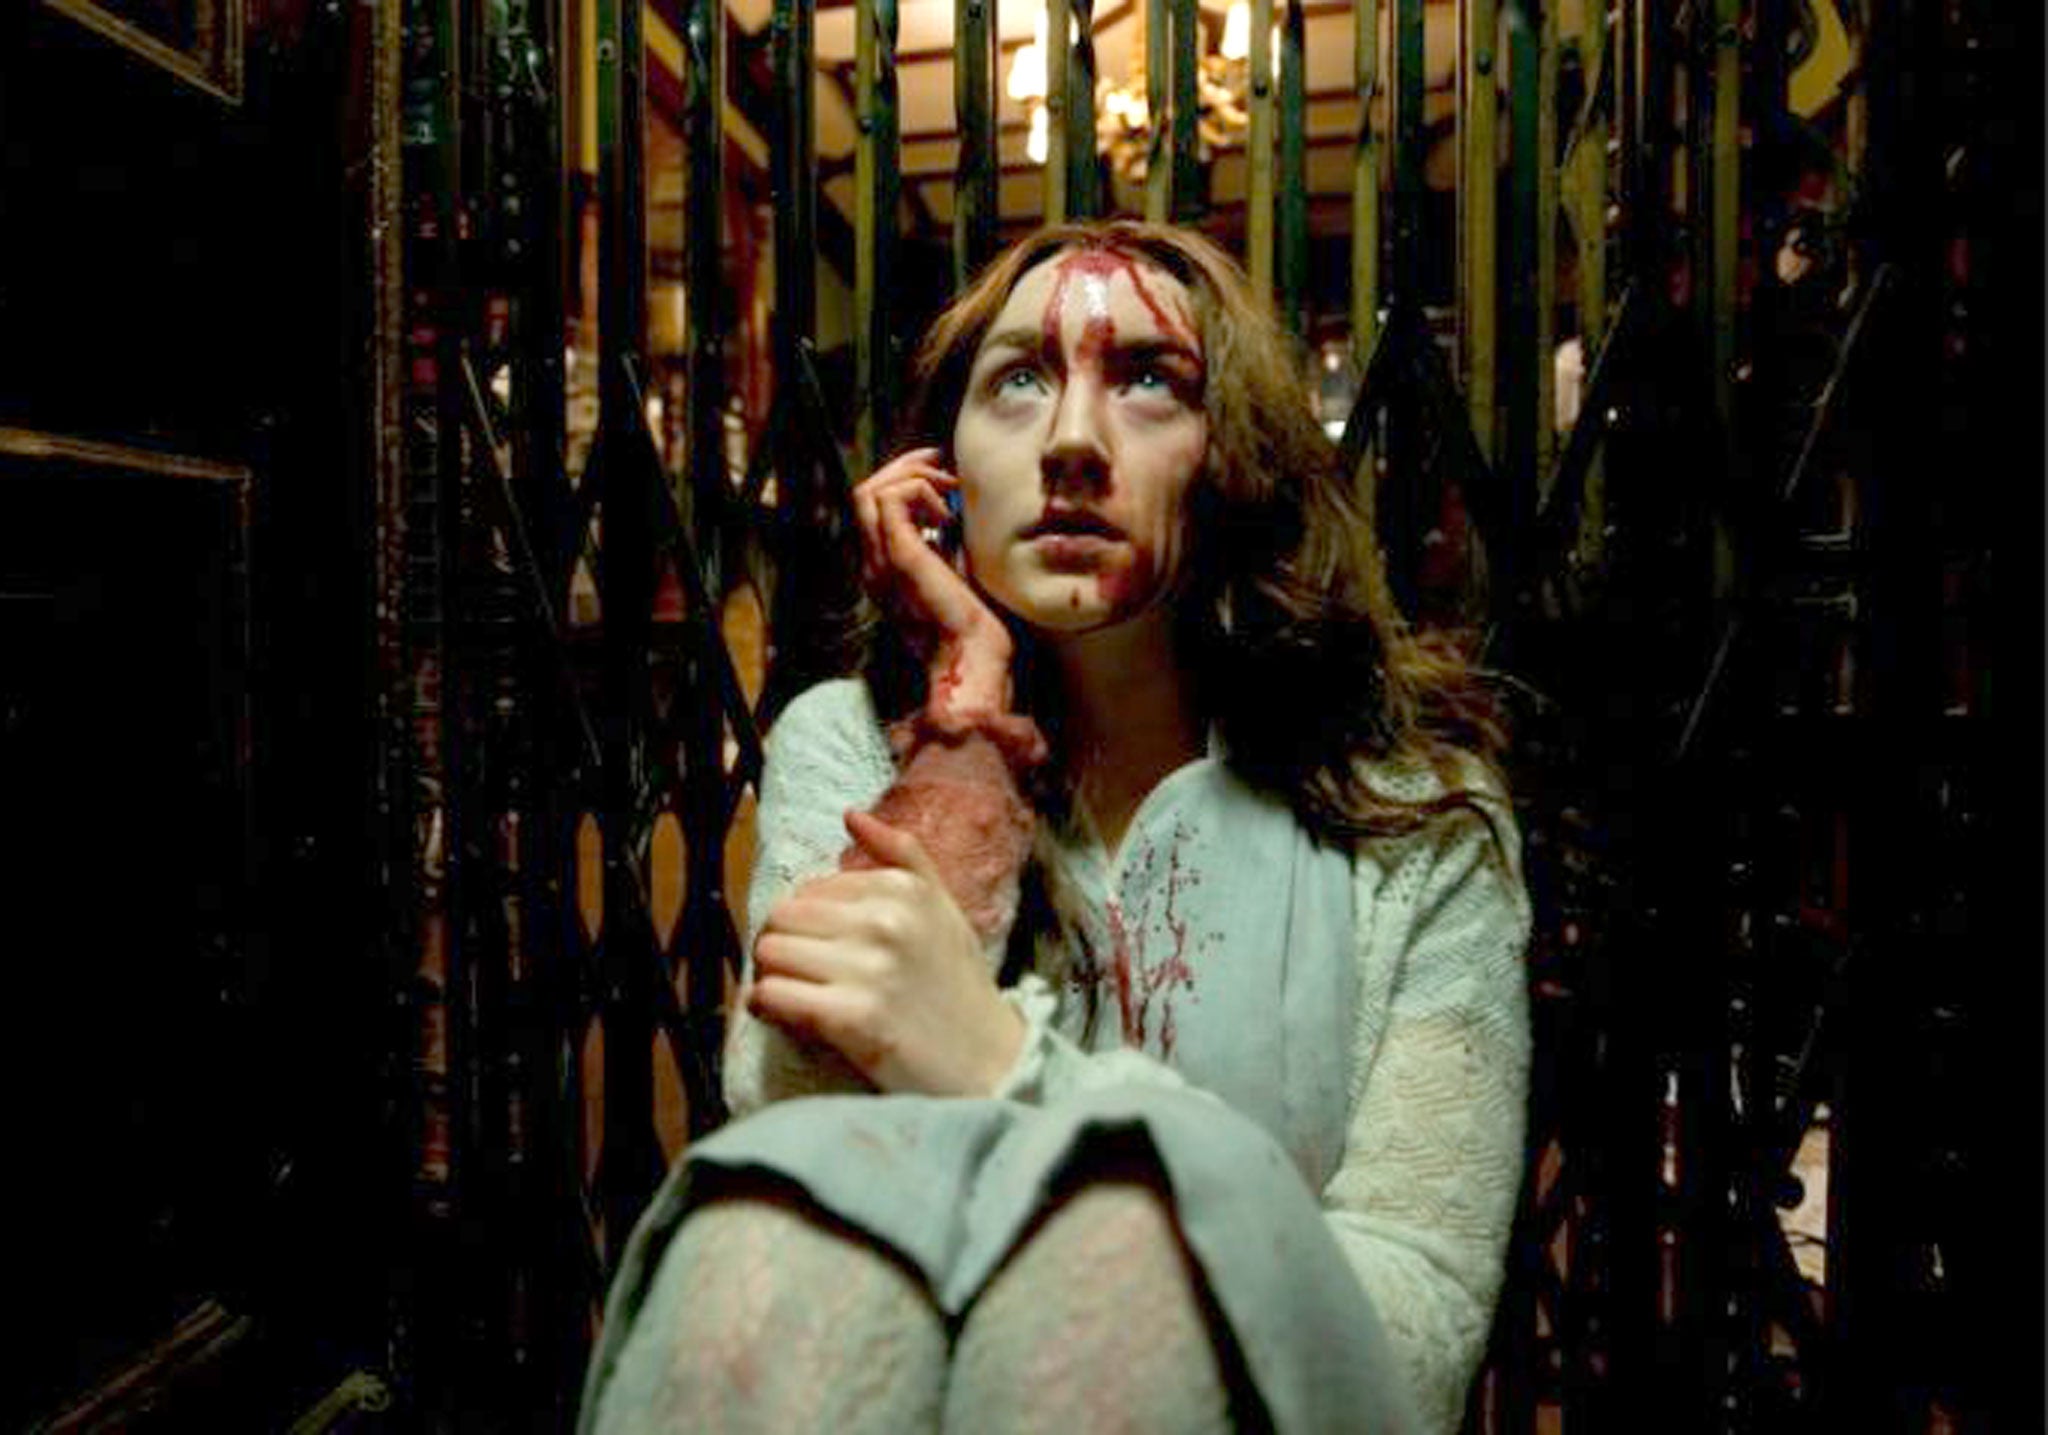 Tortured soul: Saoirse Ronan stars as an introverted teenage vampire in the fantasy thriller 'Byzantium'